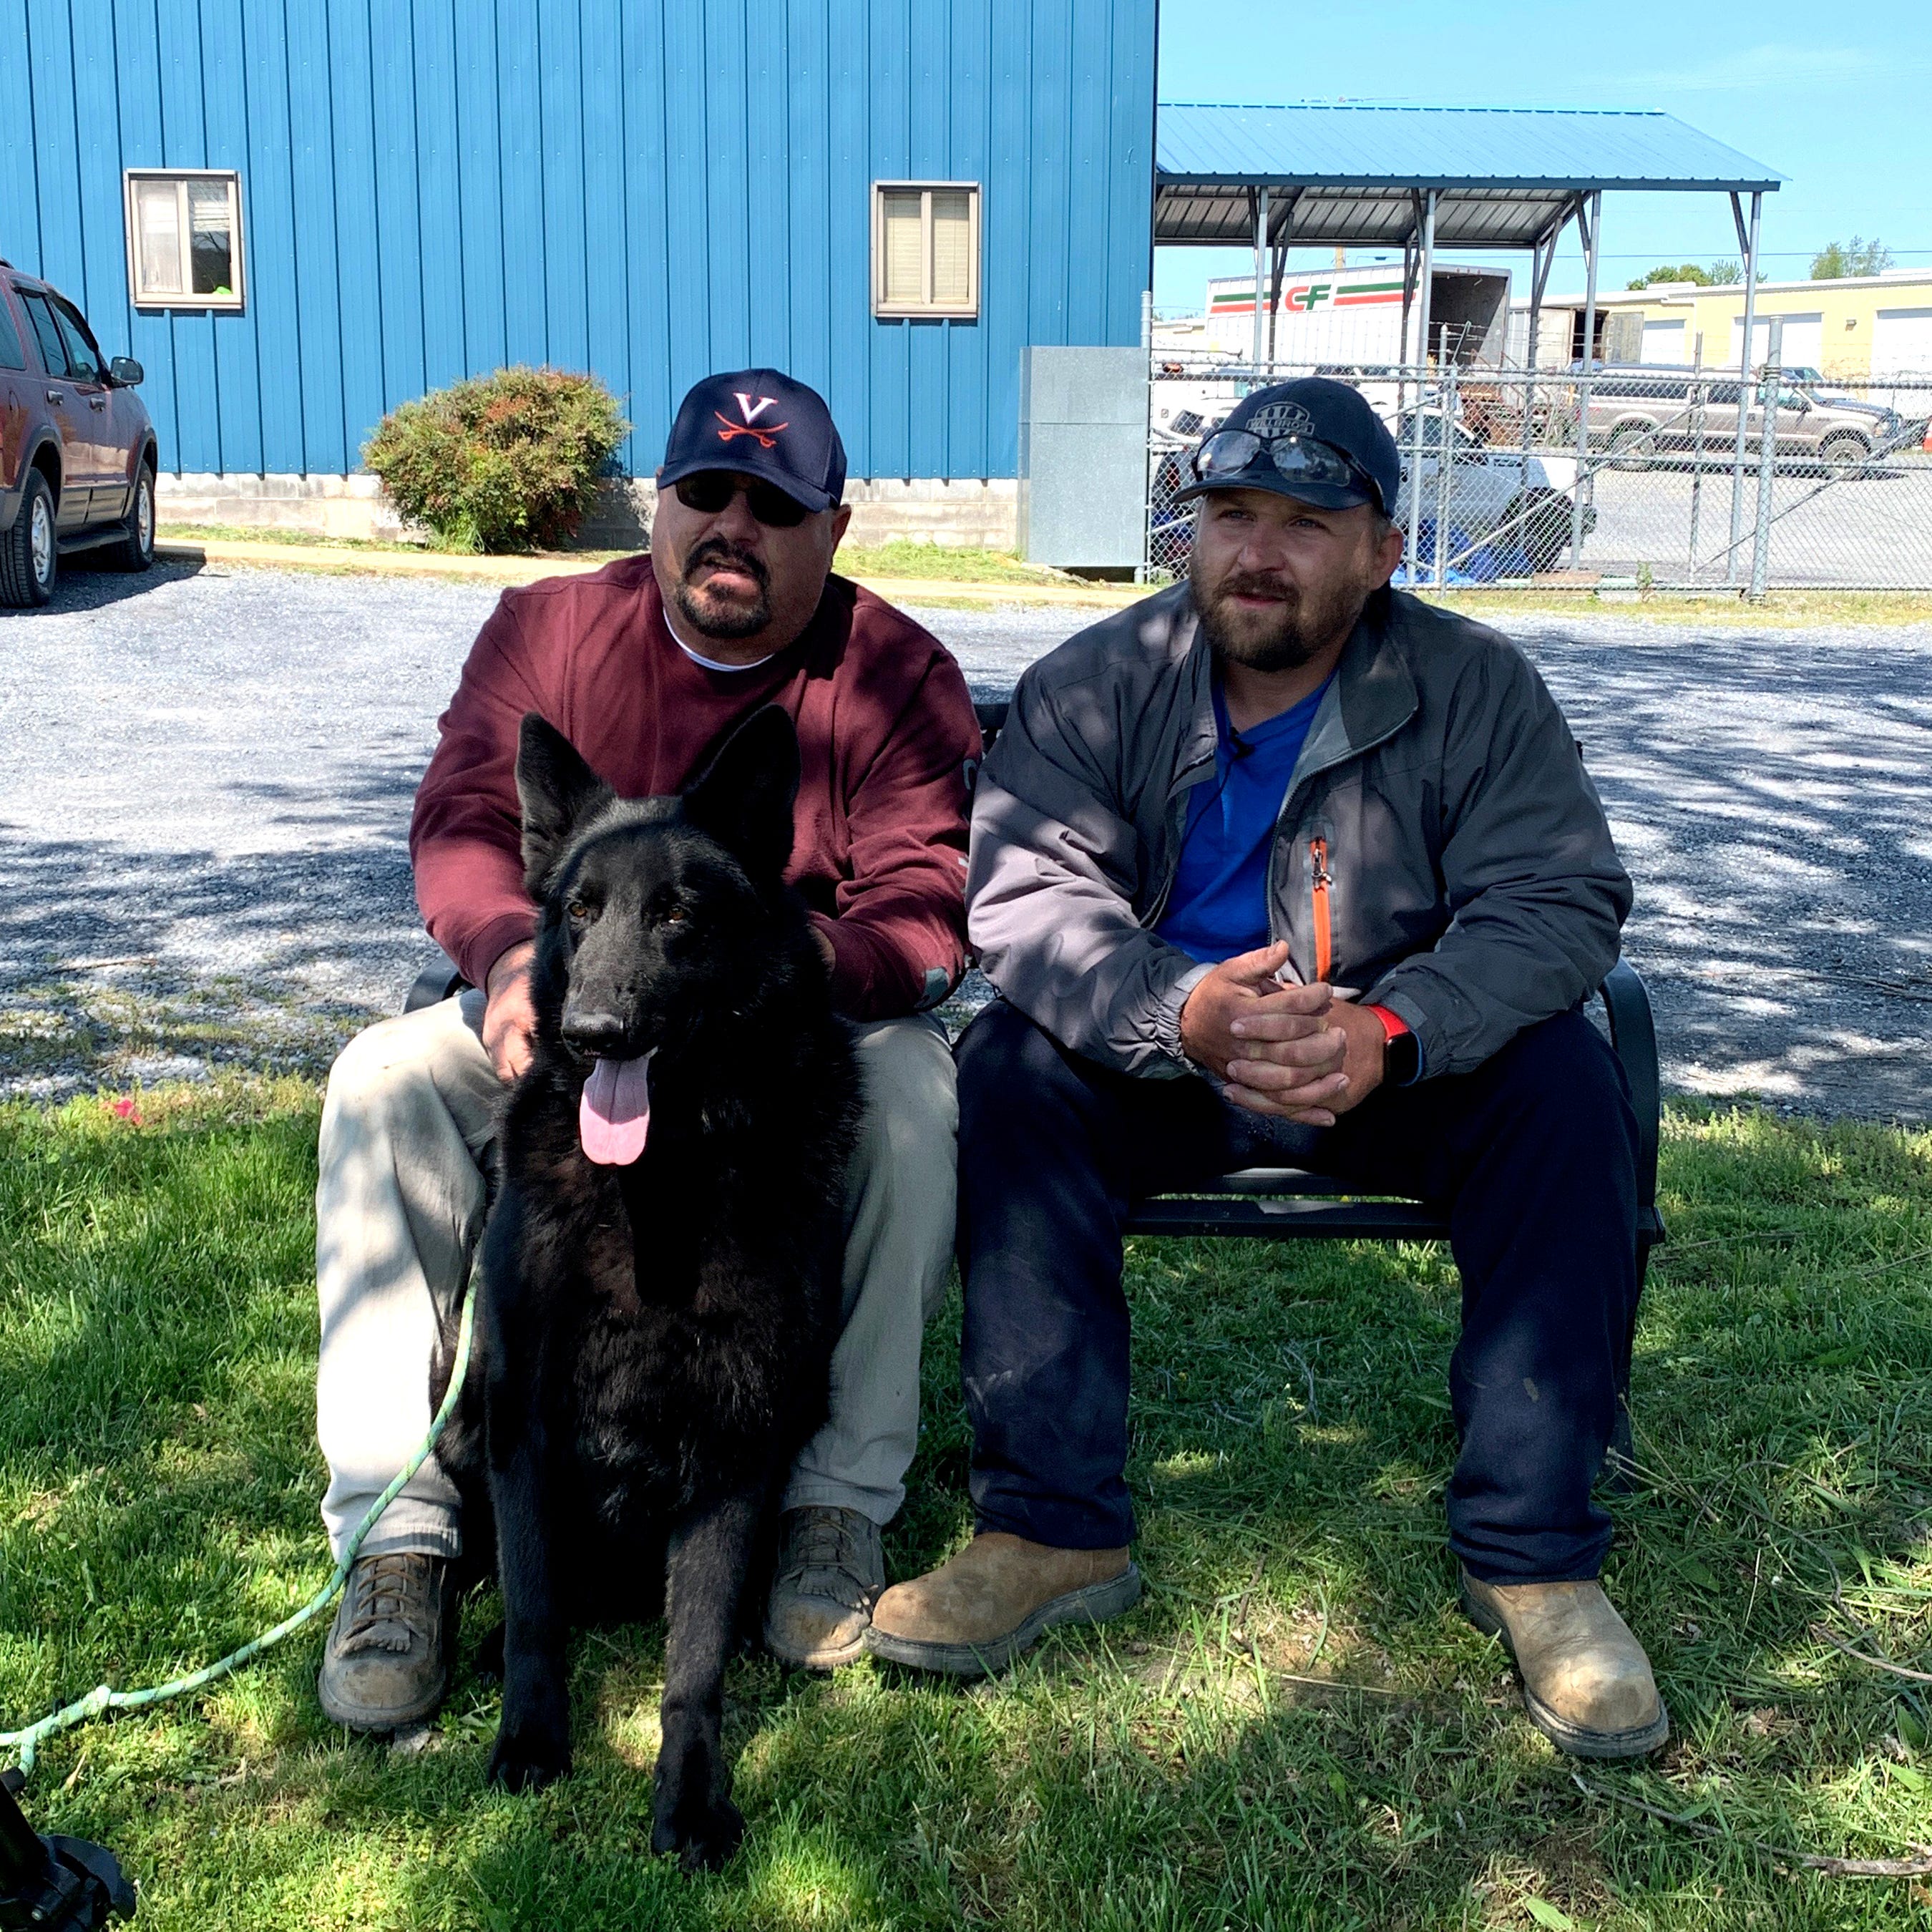 Jay Johnson and Cavaja Holt with Jett Thursday morning, May 7. The two men helped save Jett's life when the dog was choking on a ball Wednesday. Johnson coached, and Holt pulled the ball out of Jett's mouth and gave him mouth-to-mouth resuscitation.